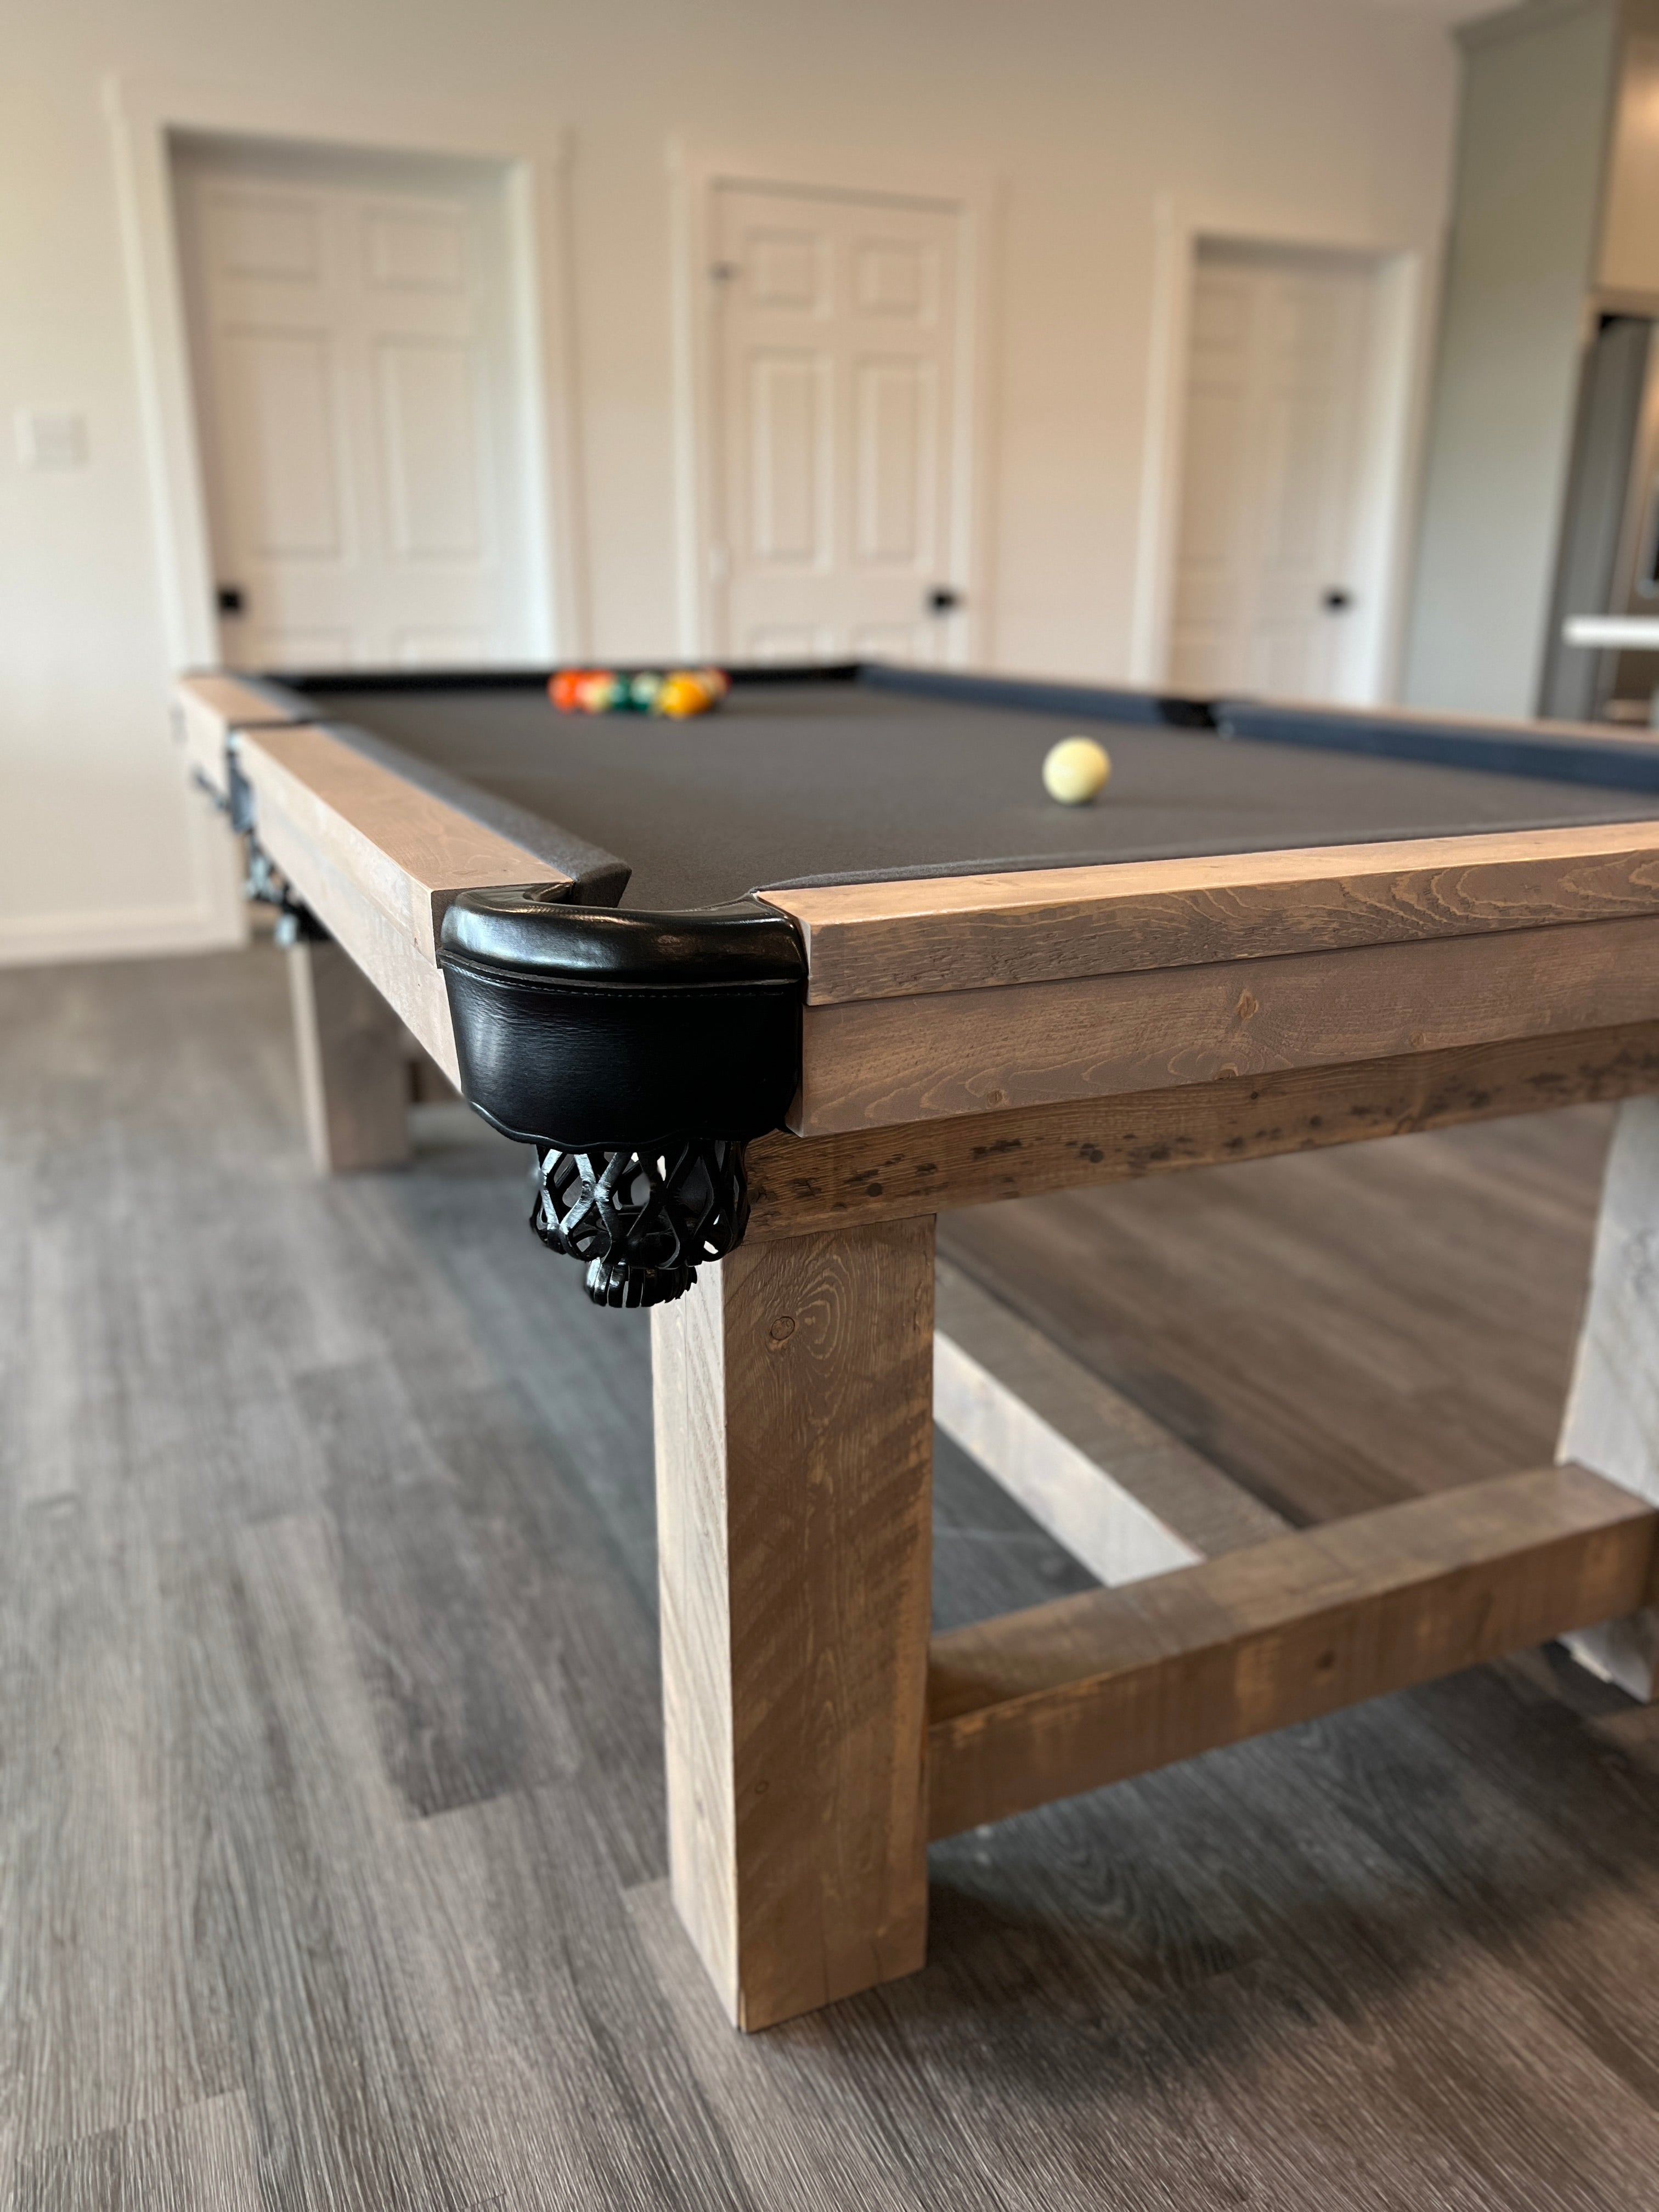 Refined Rustic Pool Table